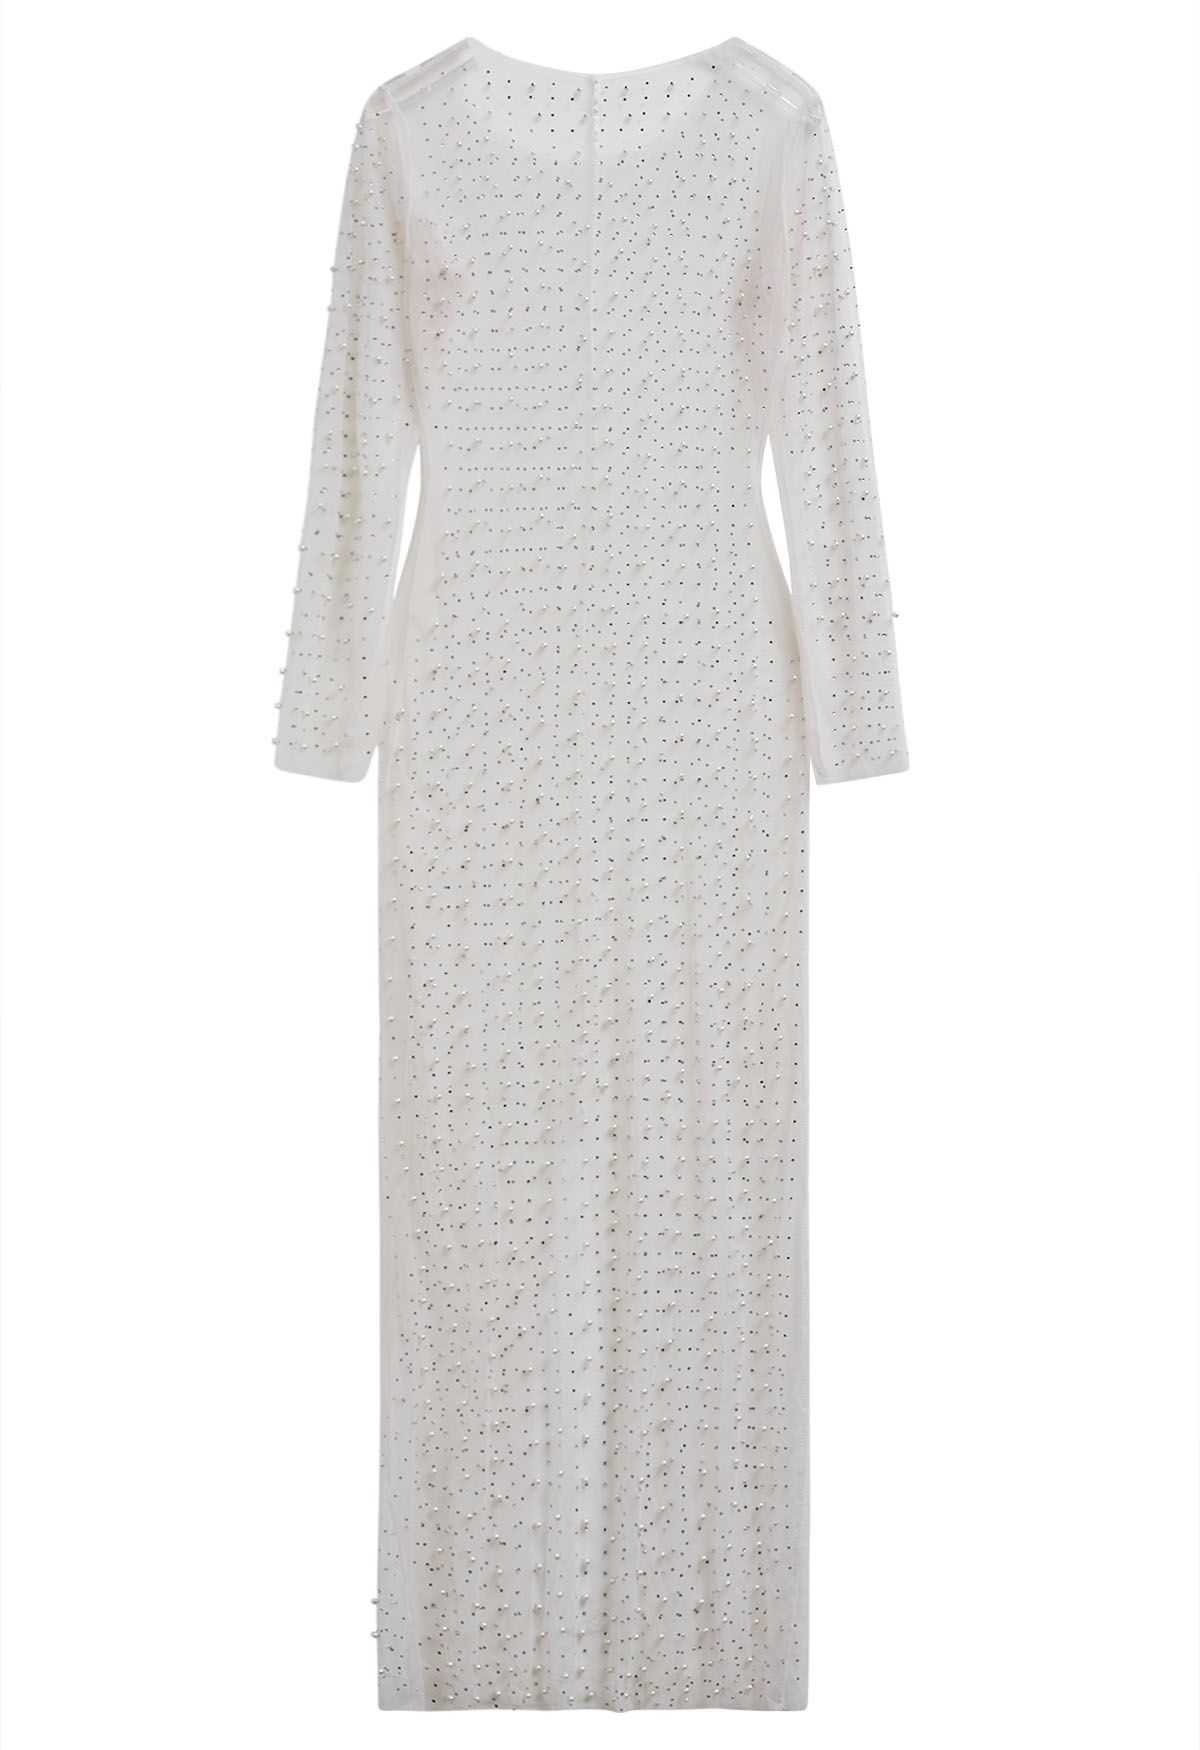 Full Pearl Embellished Sheer Mesh Cover-Up Maxi Dress in Cream